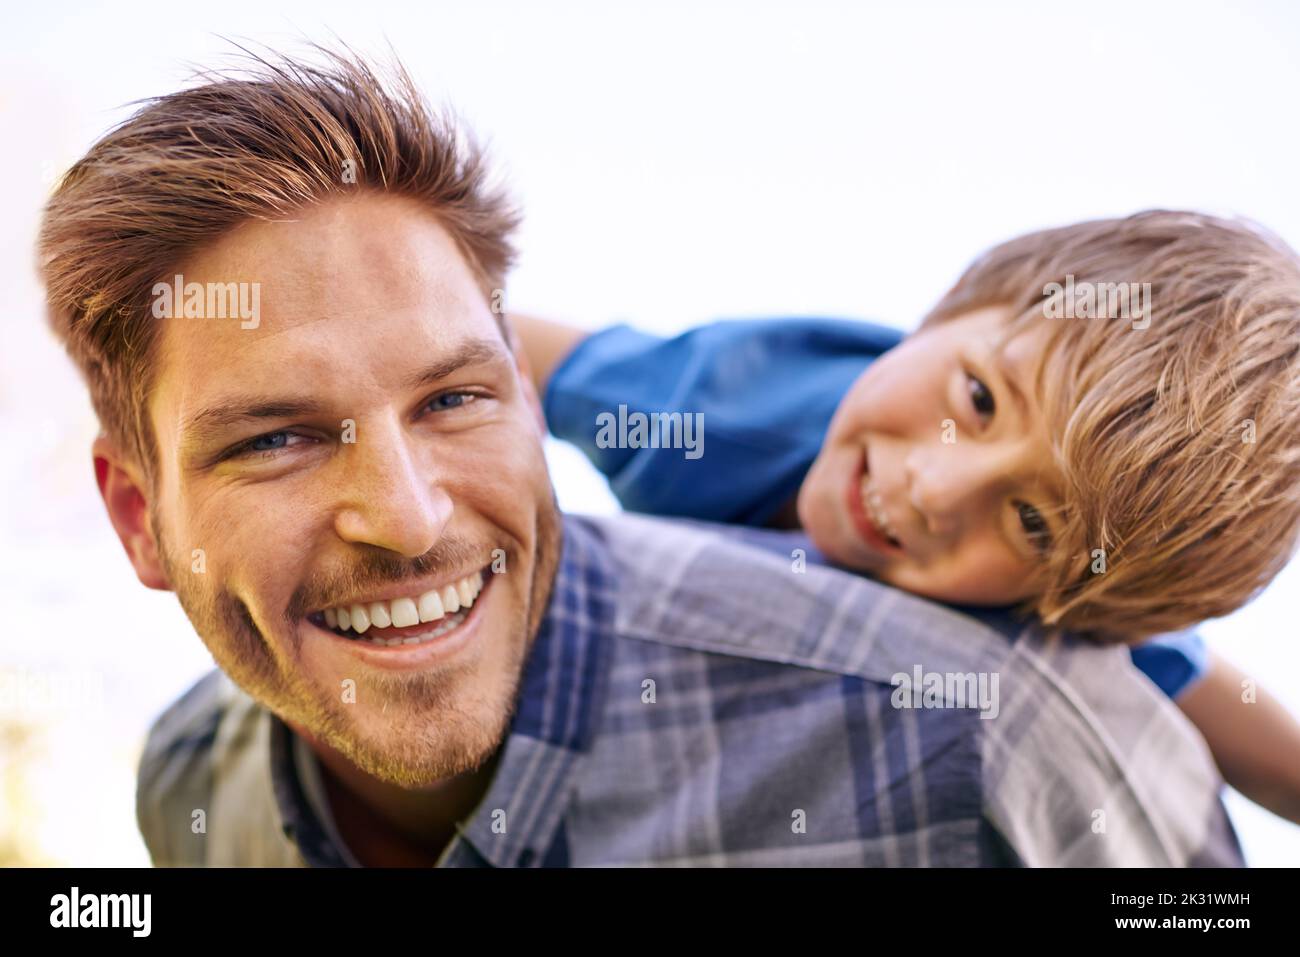 Like two peas in a pod. Portrait of an affectionate young father and his son. Stock Photo